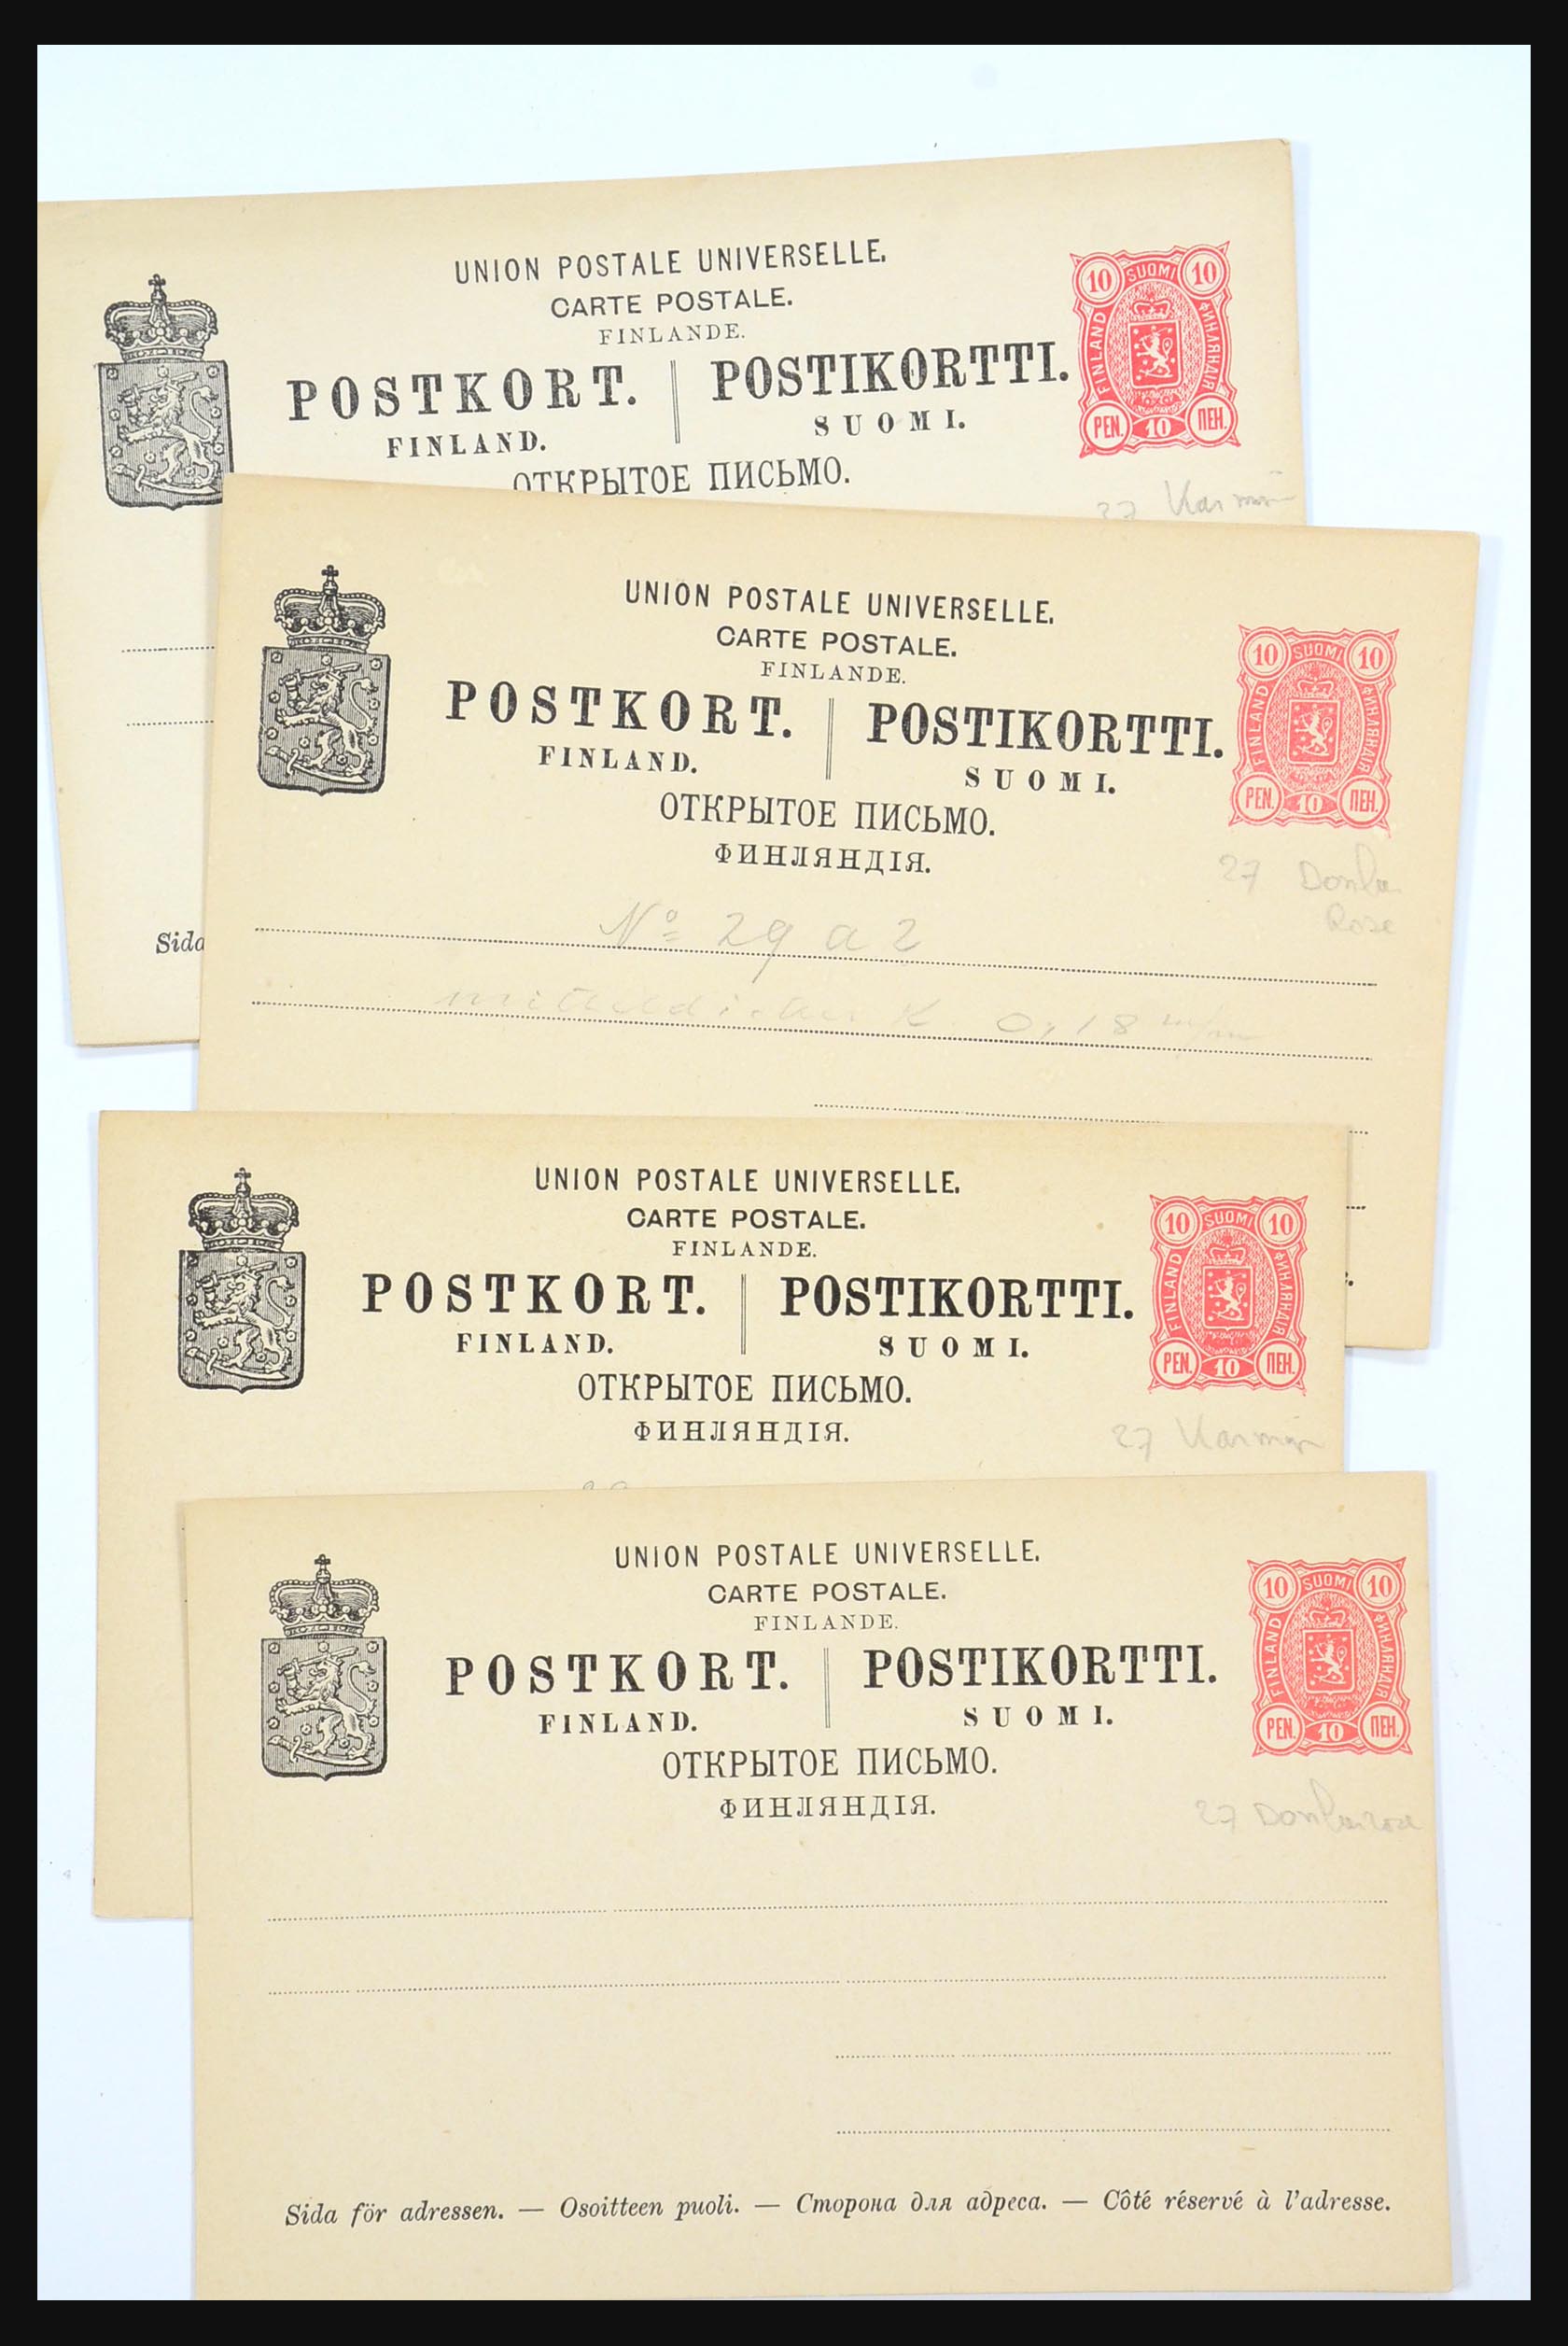 31363 229 - 31363 Finland covers 1874-1974.